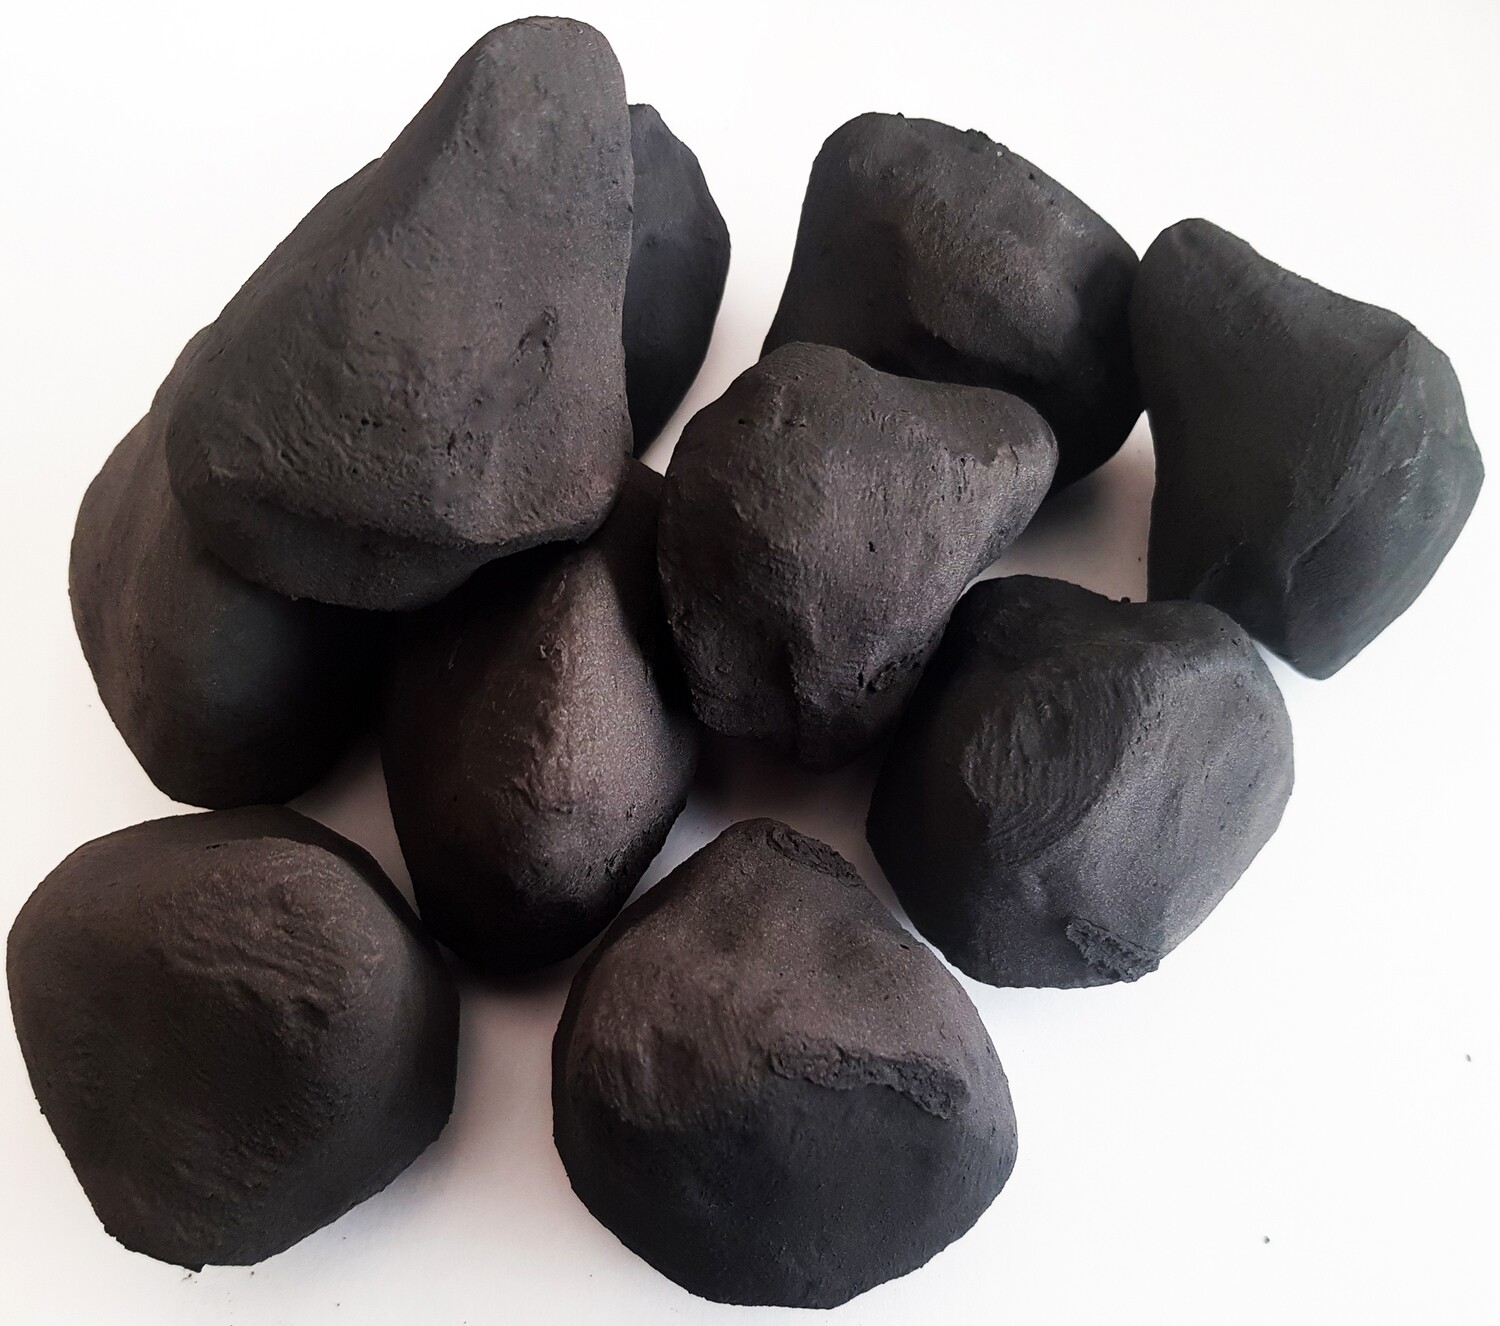 30 GAS COAL FIRE REPLACEMENT CERAMIC 4 COLOURS PEBBLES 50MM NEW SELLER OFFER 